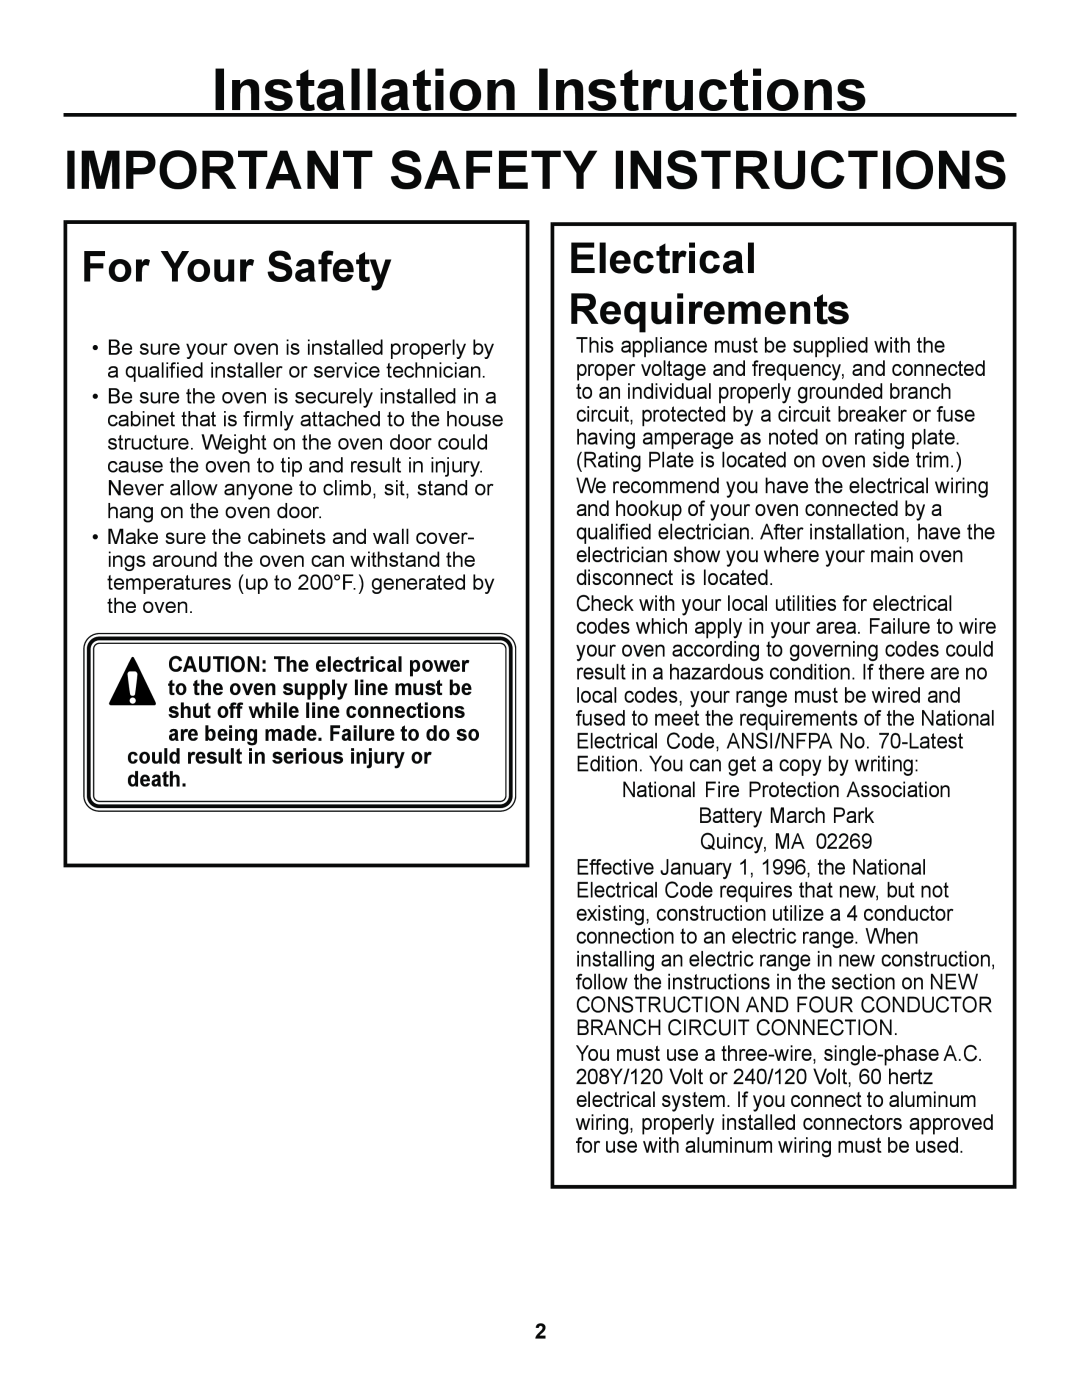 GE JKS05, JKP27, ZEK957 Installation Instructions, Important Safety Instructions, For Your Safety, Electrical Requirements 